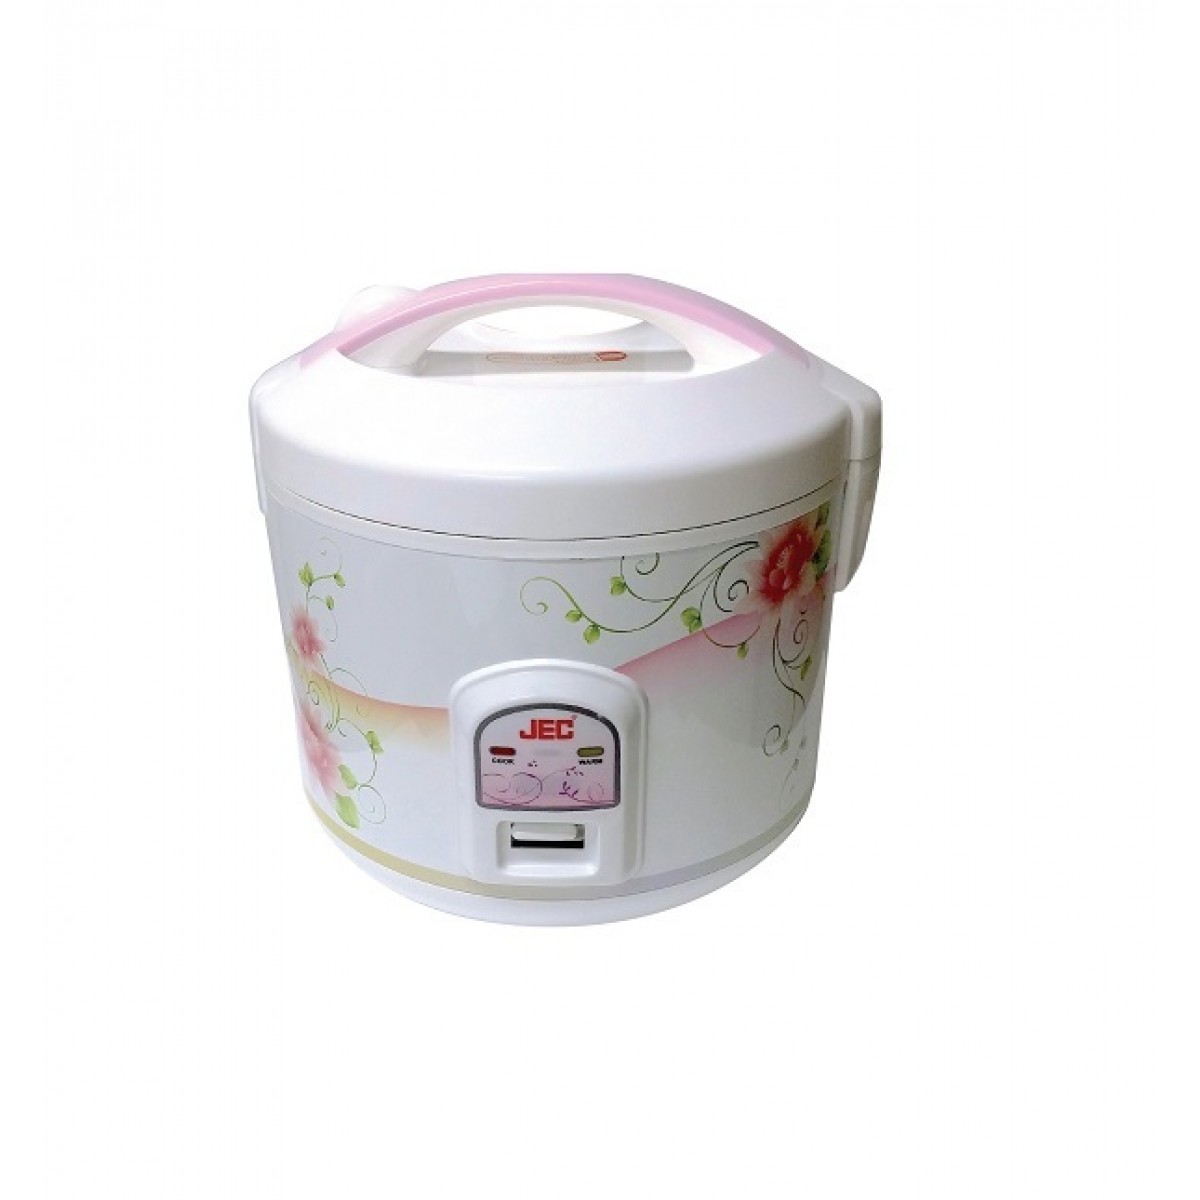 Automatic Rice Cooker RC-5500 - Rice Cooker - Home Appliances - Products